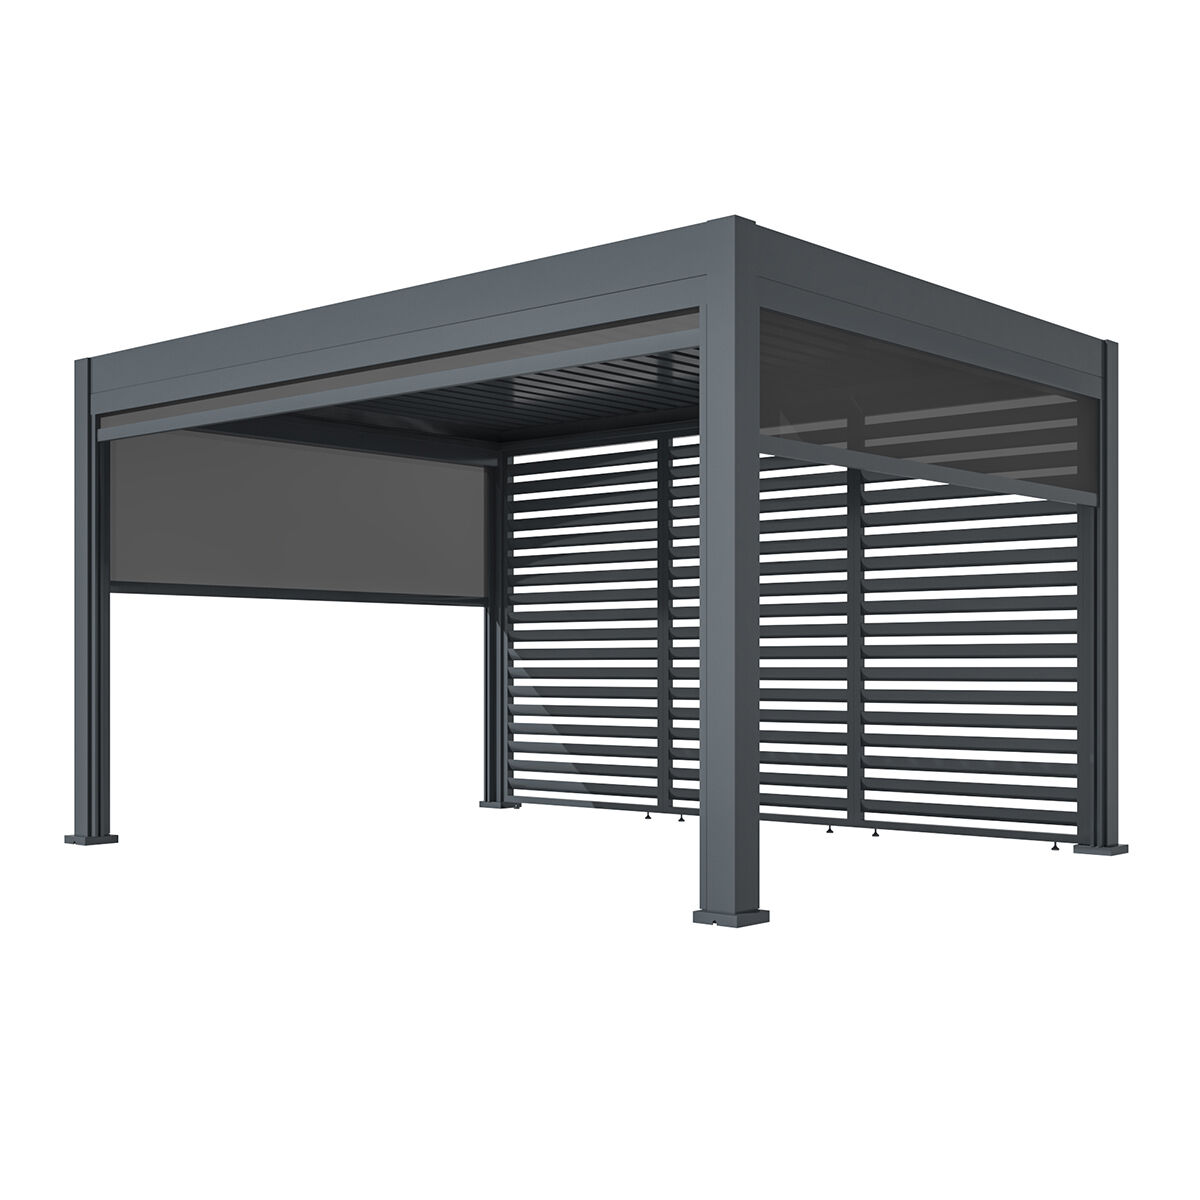 Maze Eden - 3m x 4m Aluminium Metal Outdoor Garden Pergola with LED Lights & Motorised Roof (Customise with Blinds or Louvres) product image